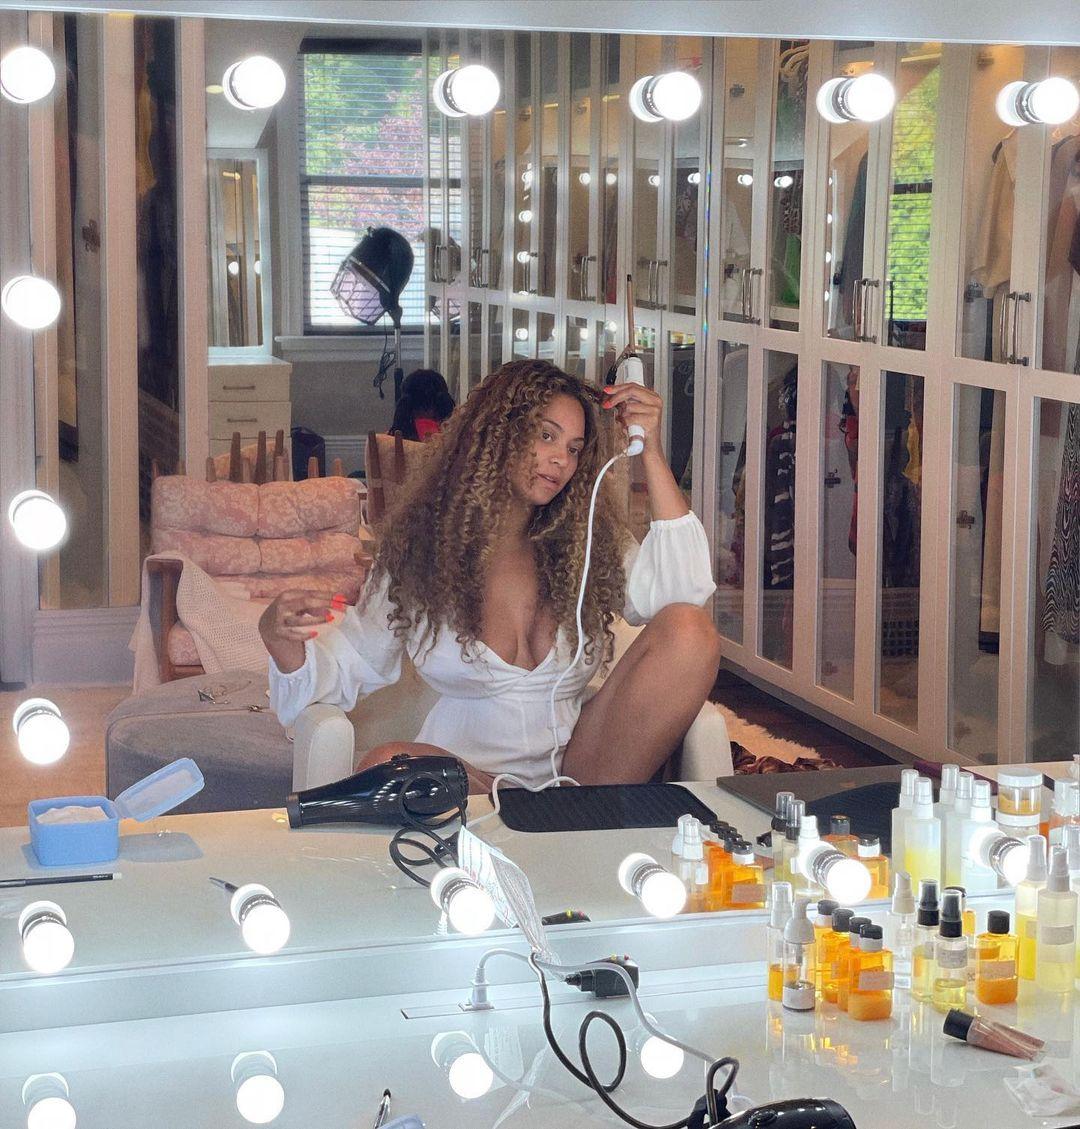 Beyonce teases hair venture in cryptic post, flaunting natural hair